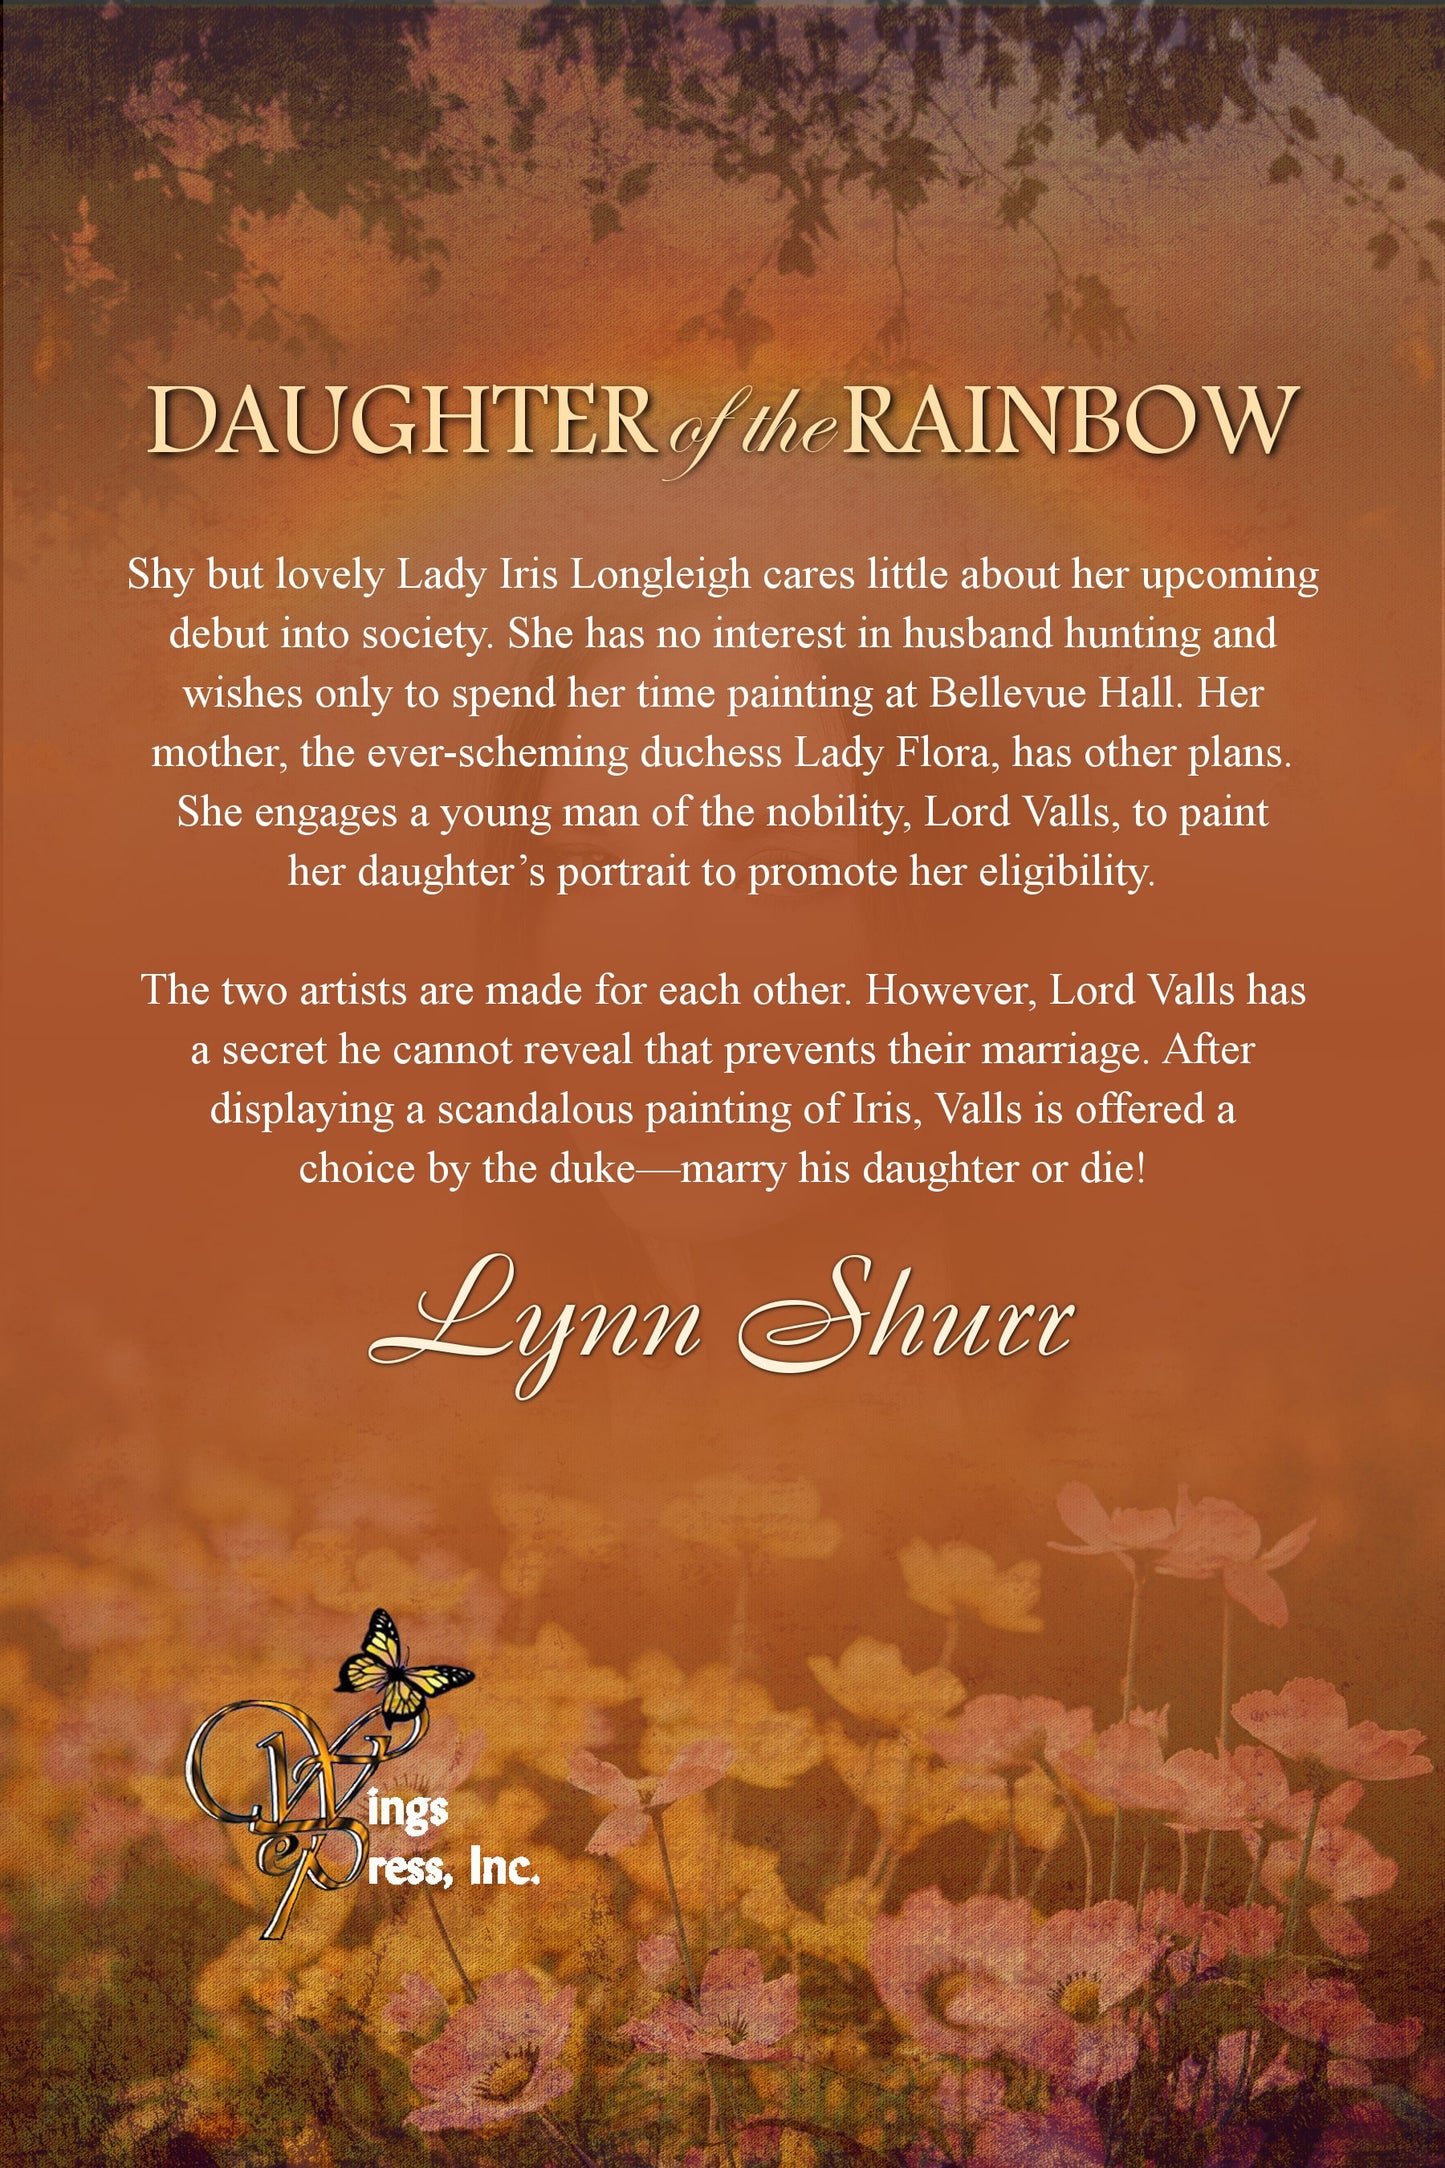 Daughter of the Rainbow